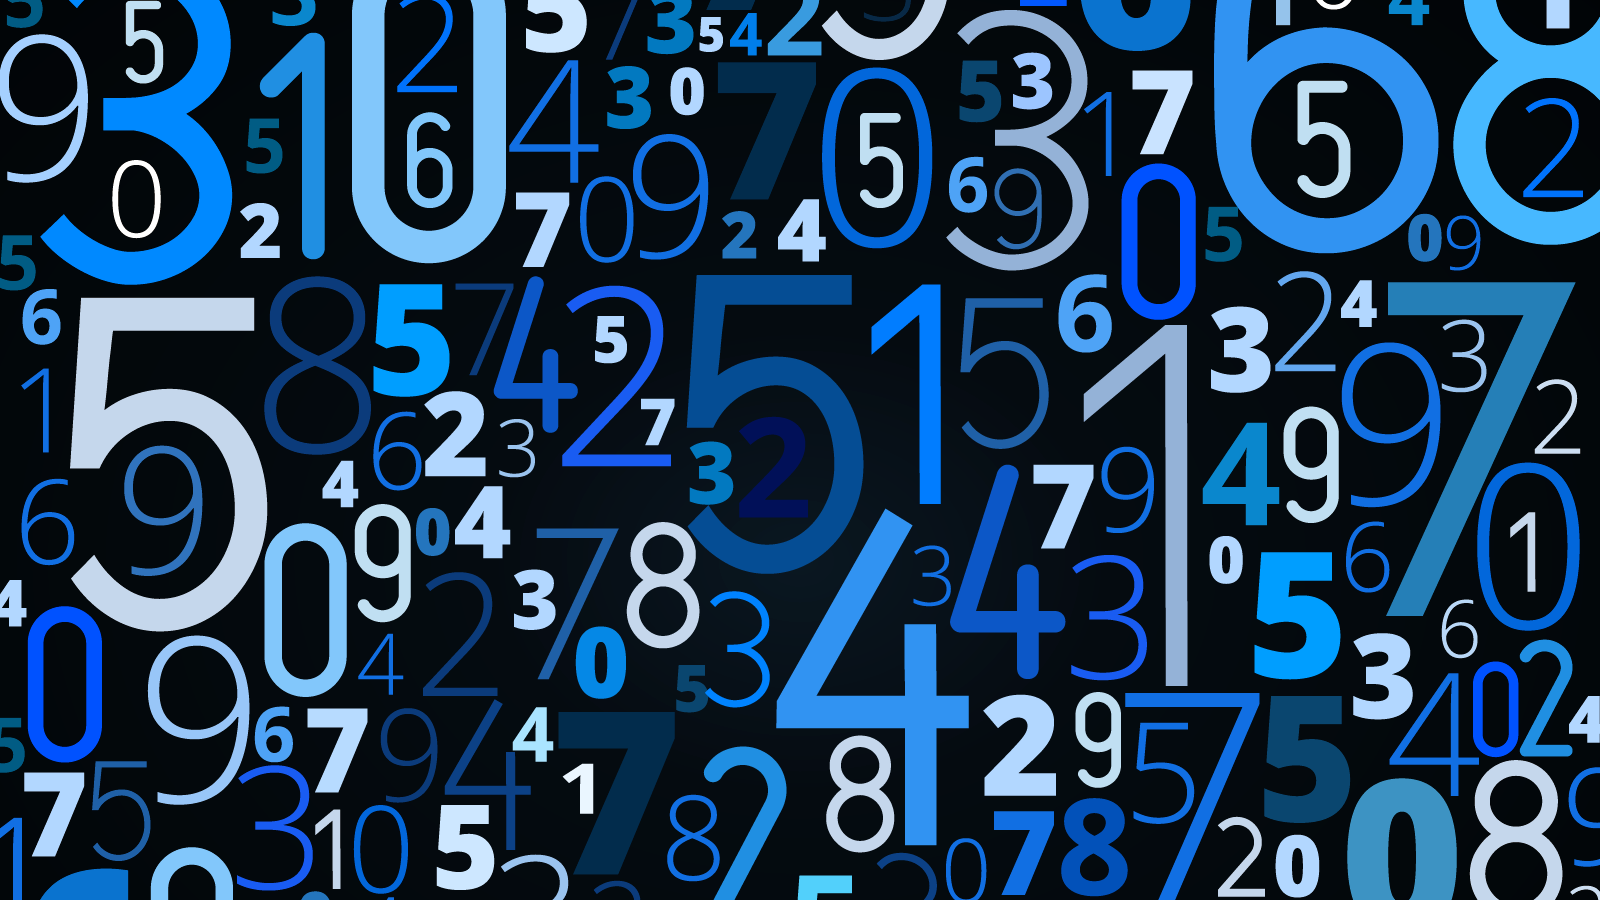 Variously sized numbers in various shades of blue